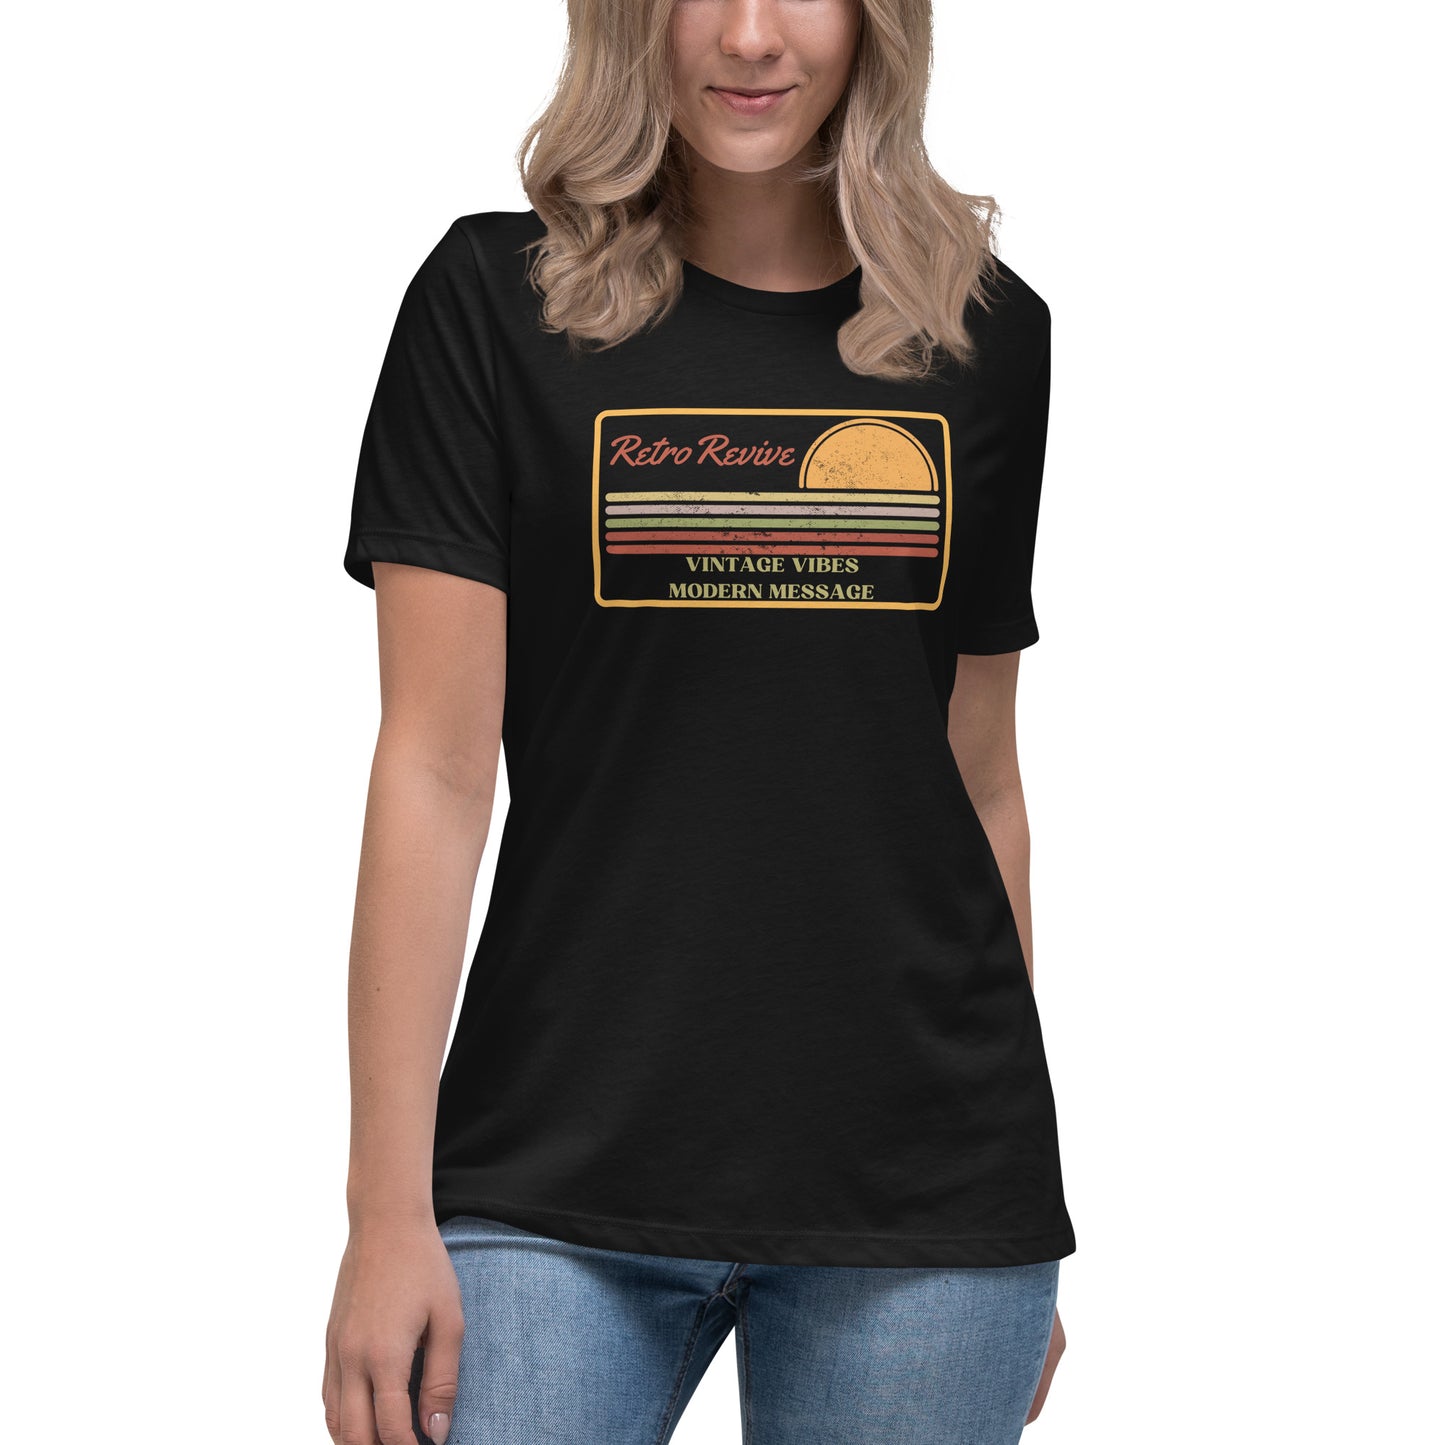 RetroRevive Vintage Vibes Modern Message Women's Relaxed T-Shirt